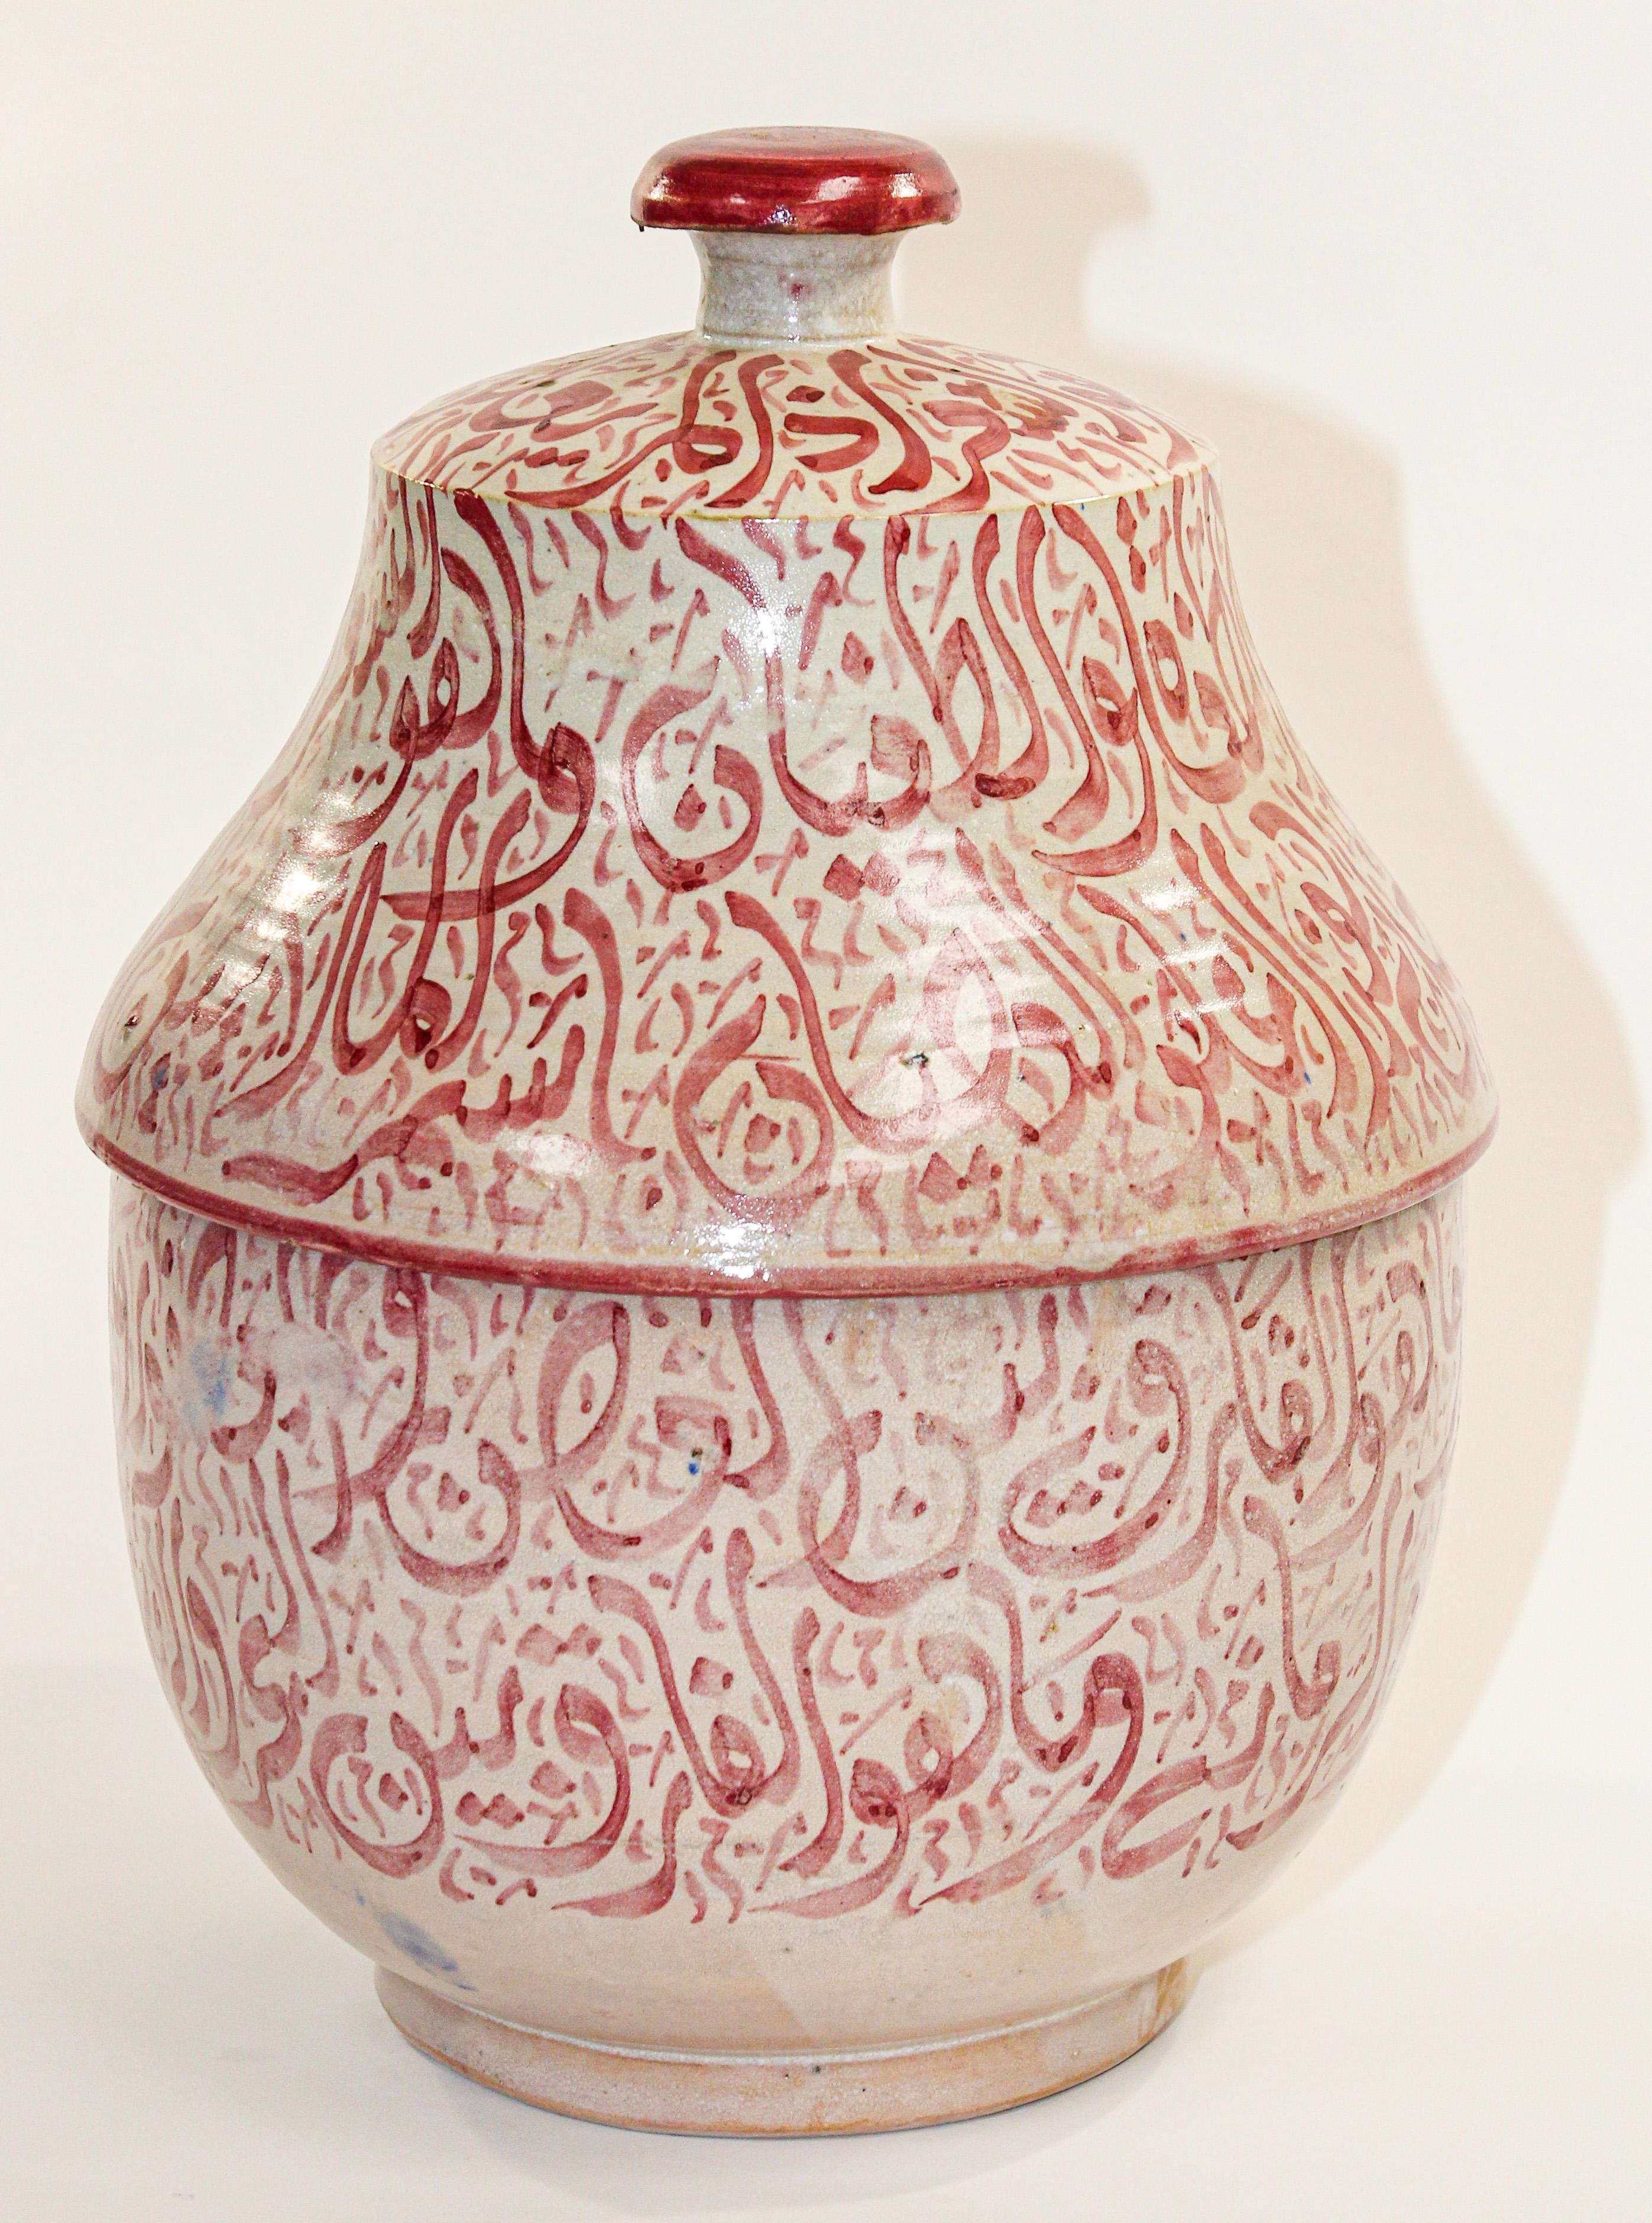 Moroccan Ceramic Lidded Urn from Fez with Arabic Calligraphy Pink Writing In Good Condition For Sale In North Hollywood, CA